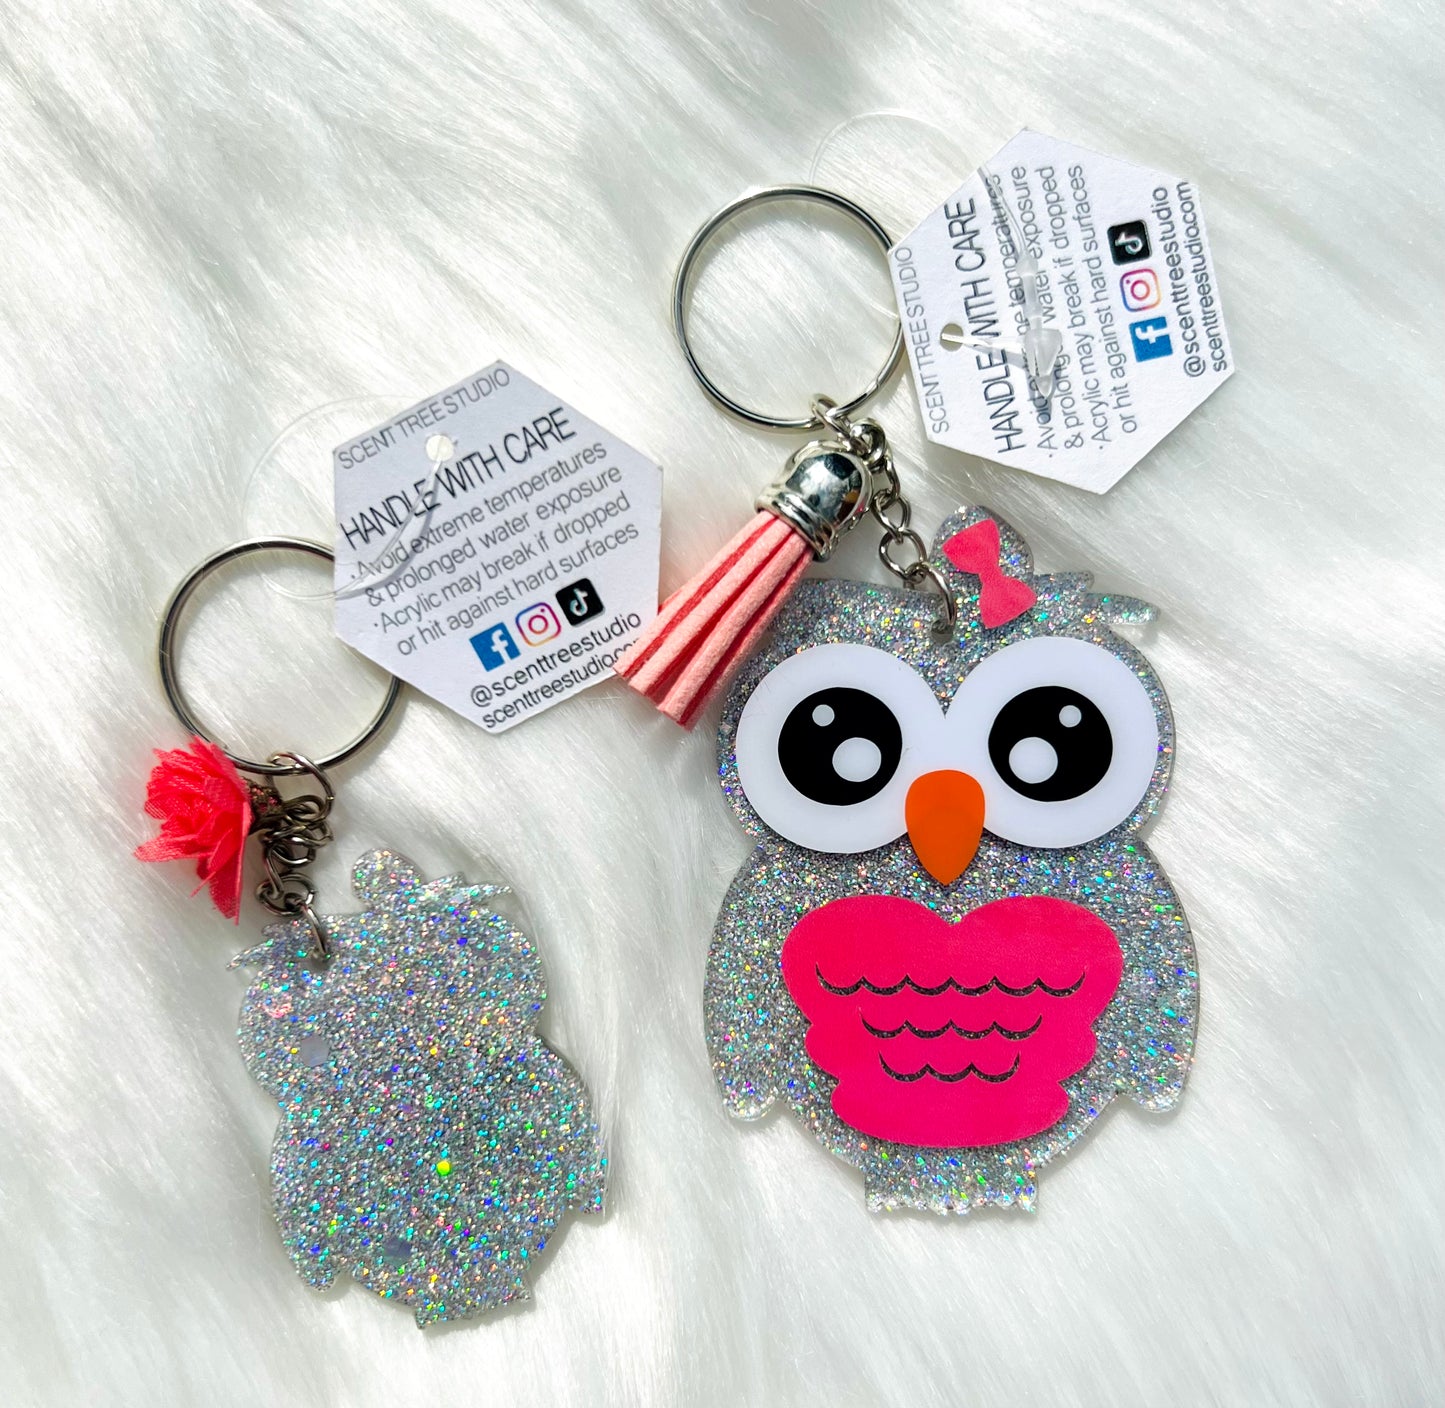 Watercolor Coral Owl Keychain - 2 or 3 Inch - Scent Tree Studio